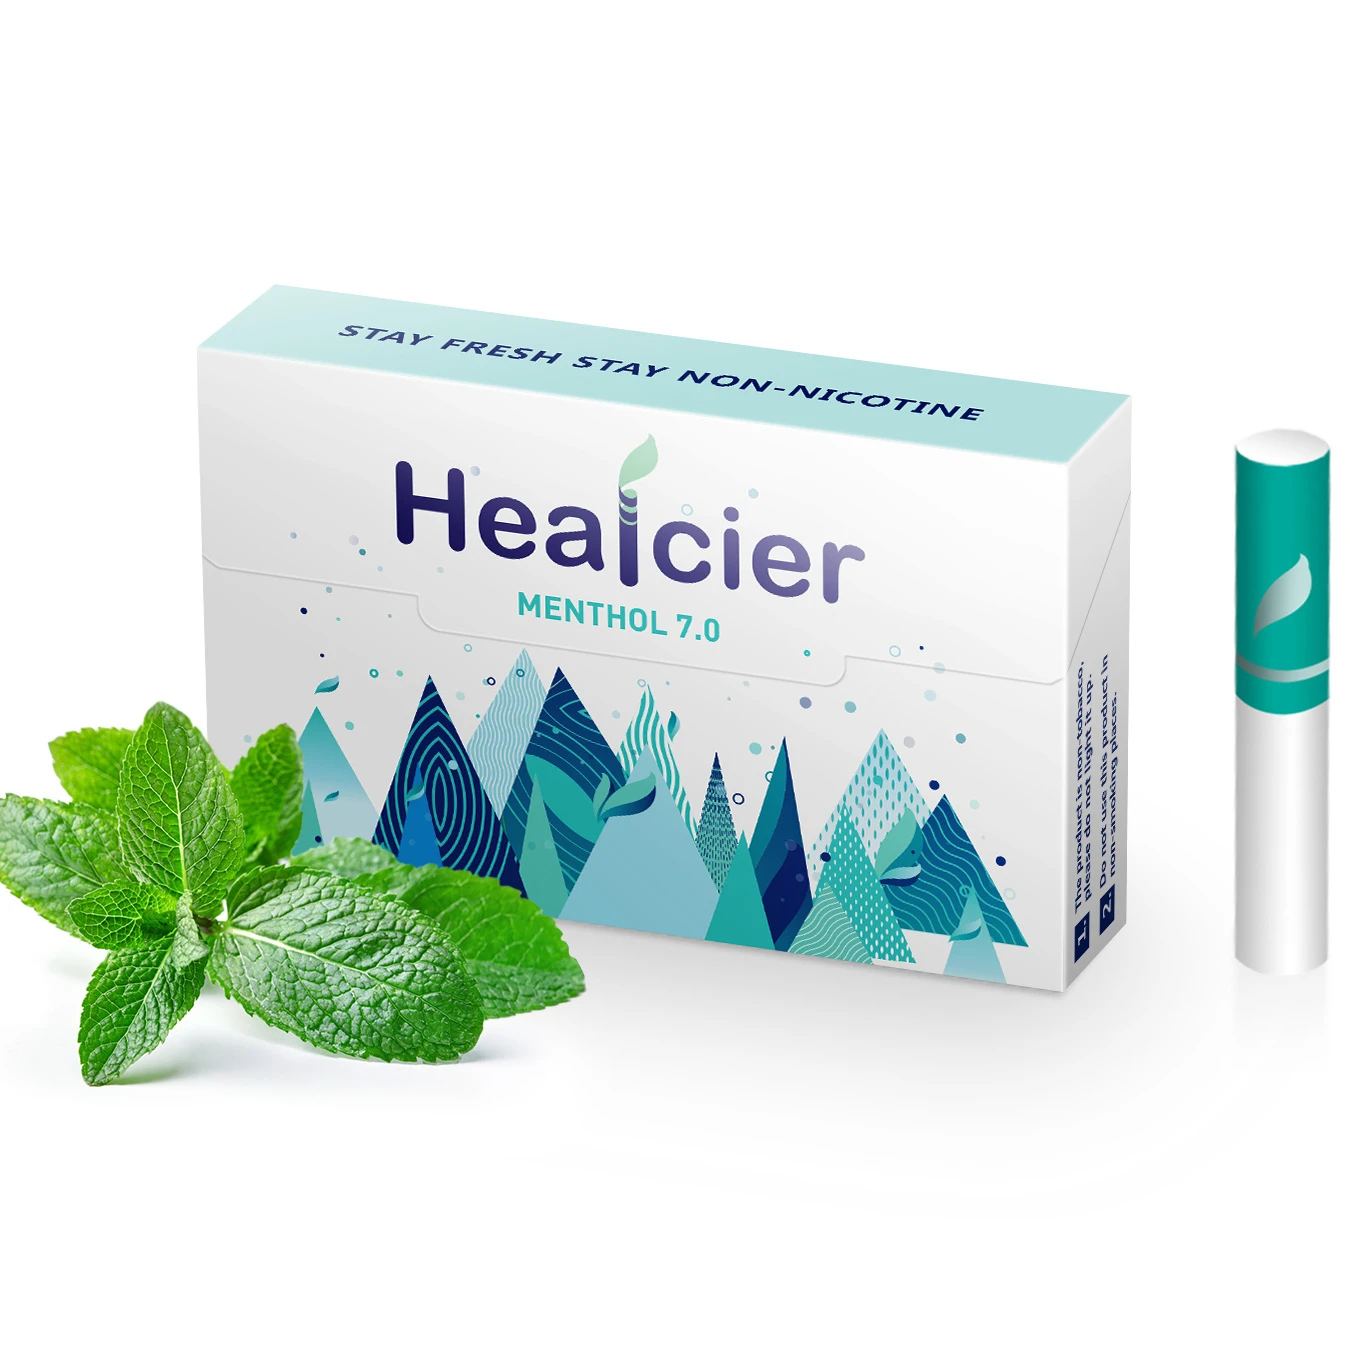 

2022 Heat Healcier herbal Stick Product Botanical Extracts not burning Sticks Menthol 7.0 for Healcier Heating Devices